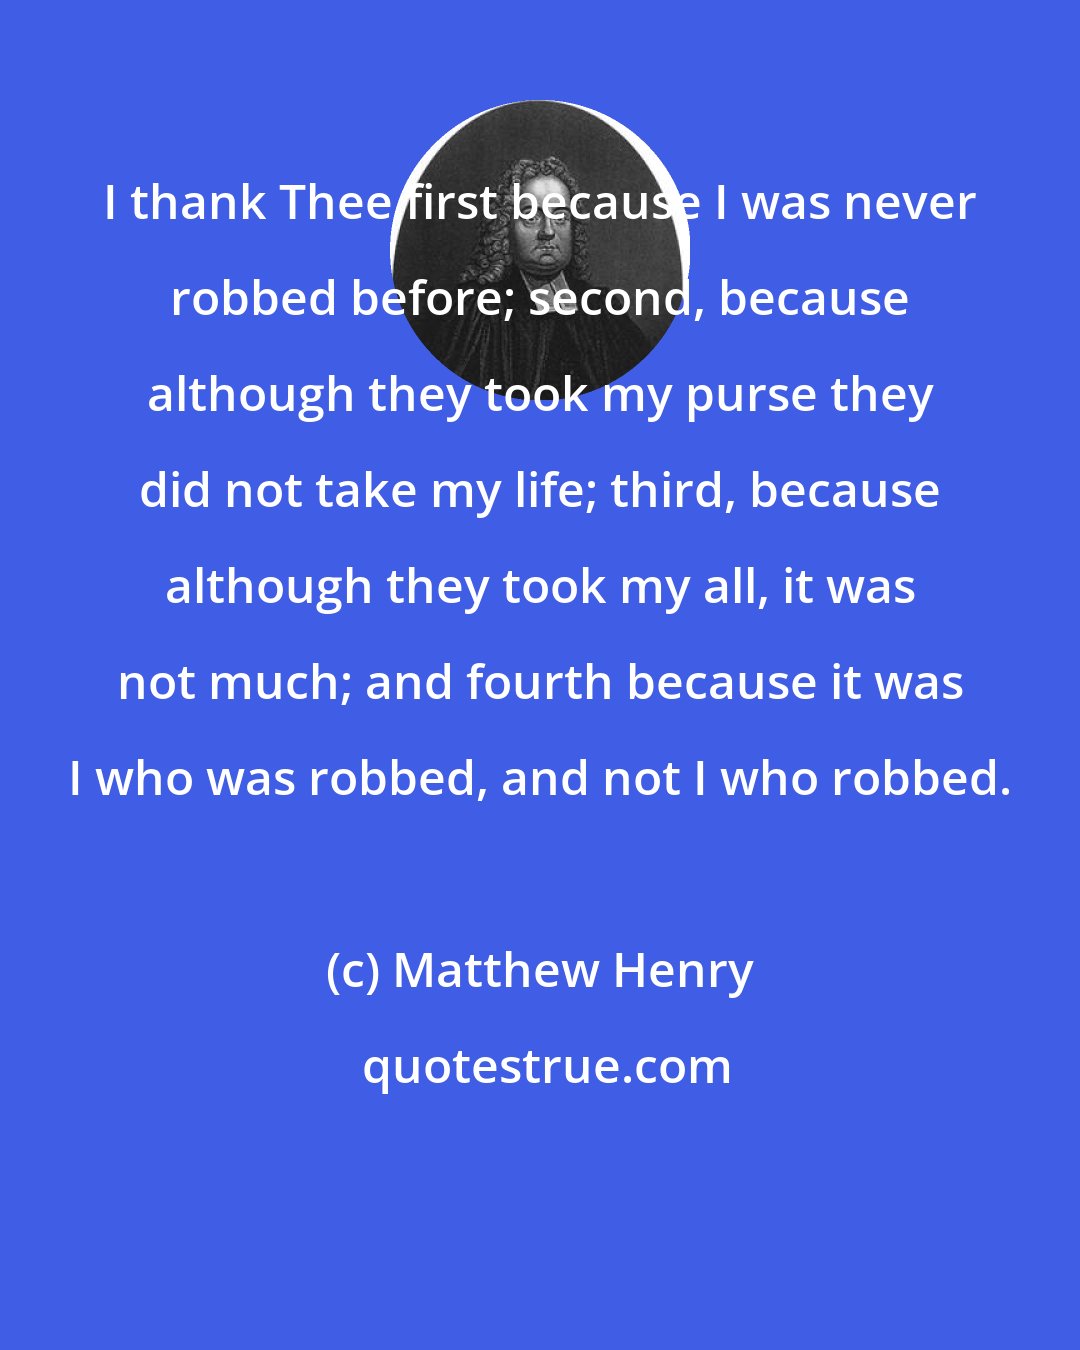 Matthew Henry: I thank Thee first because I was never robbed before; second, because although they took my purse they did not take my life; third, because although they took my all, it was not much; and fourth because it was I who was robbed, and not I who robbed.